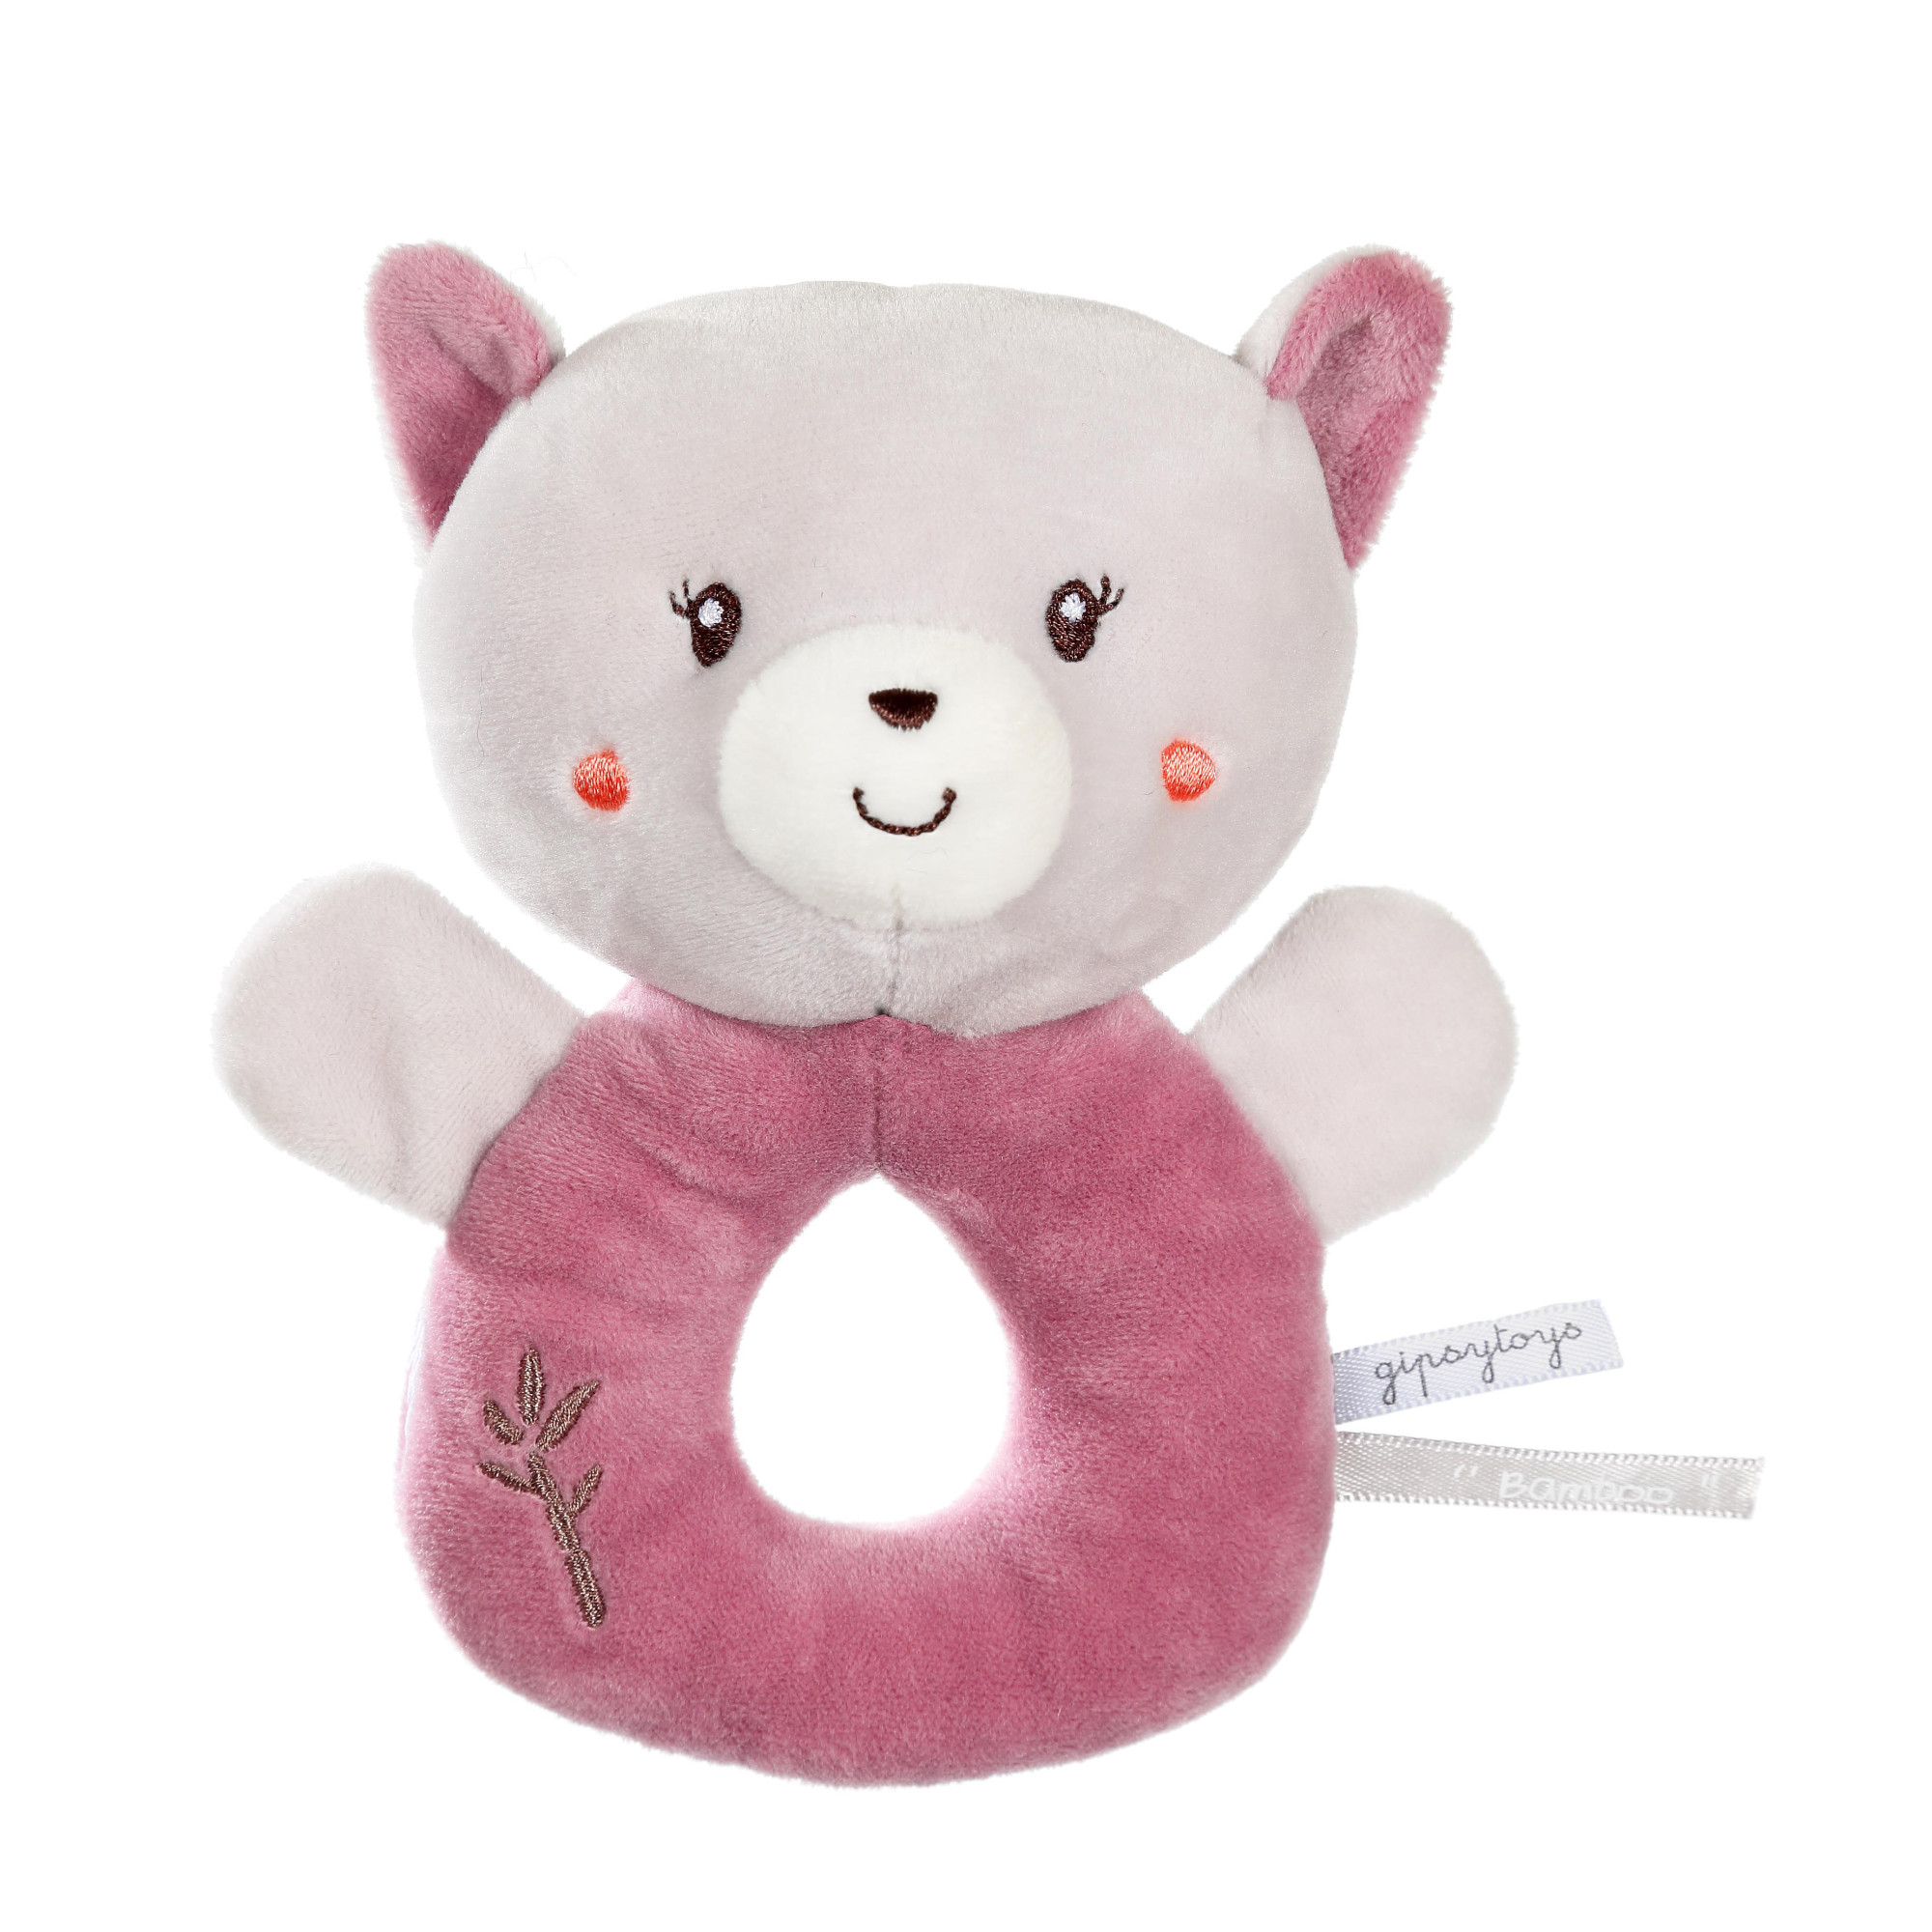 Rattle "Bamboo" Cat - 14 cm on card.